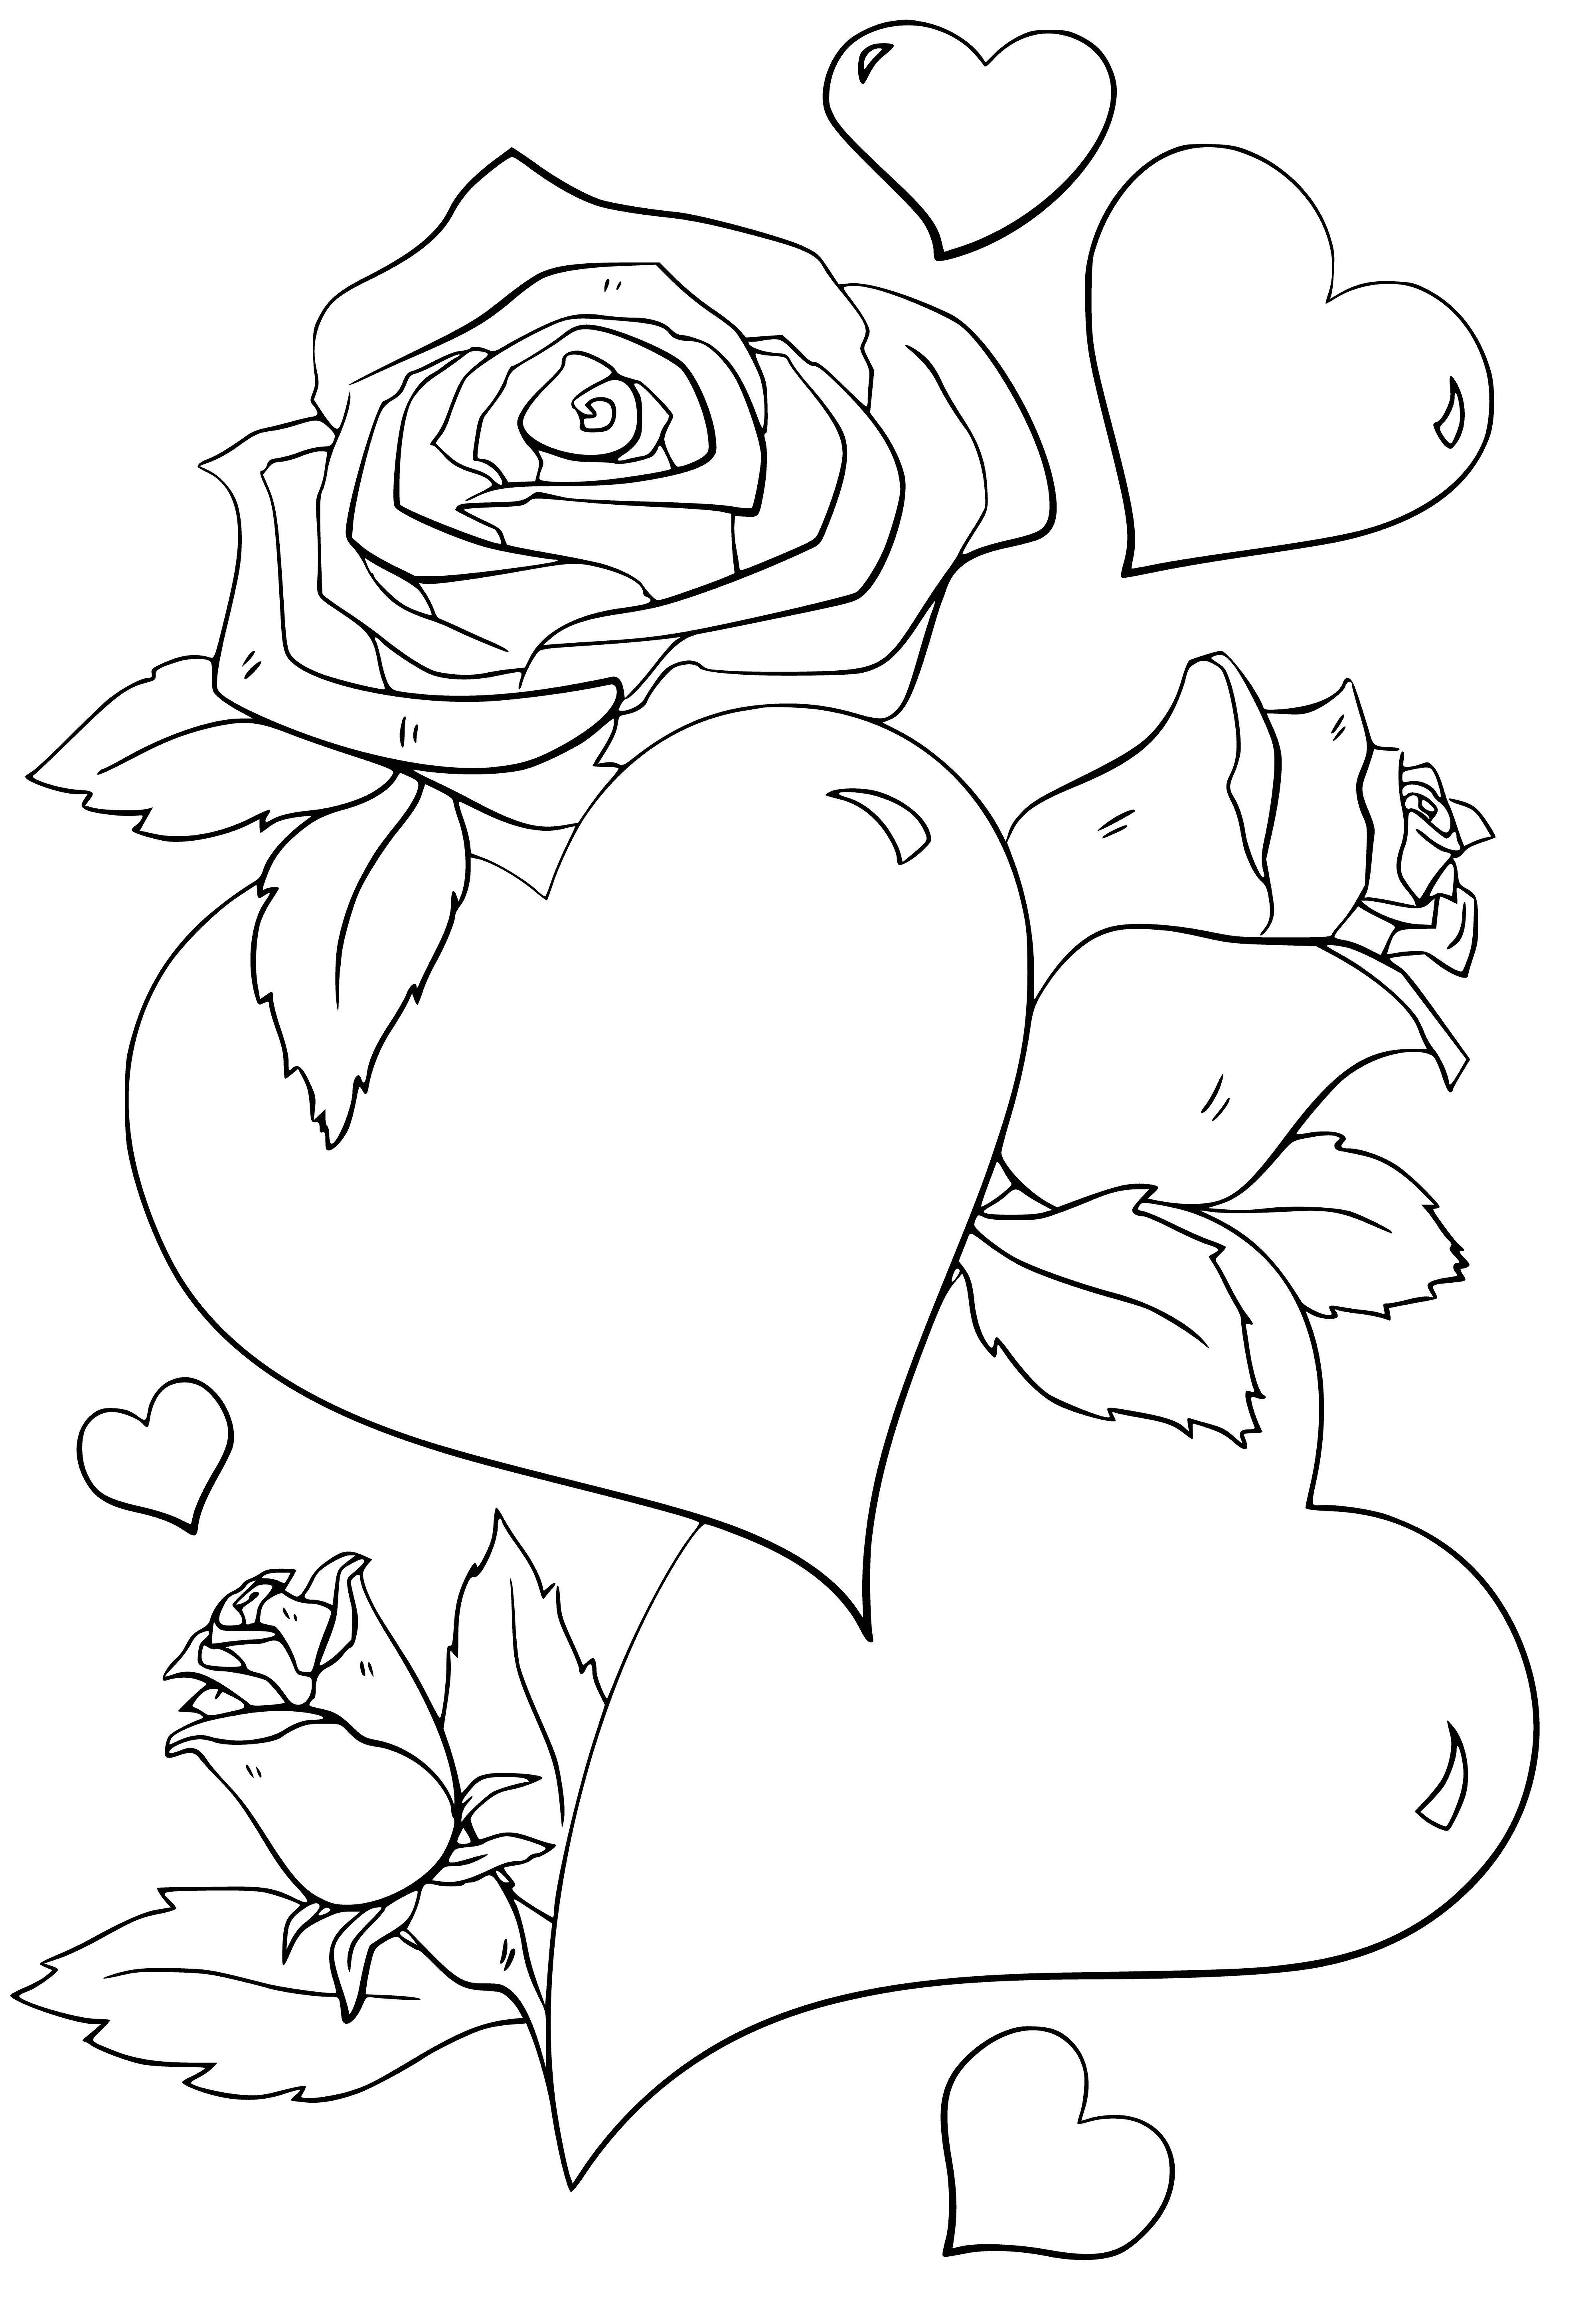 coloring page: A large red heart is surrounded by roses on a white background.